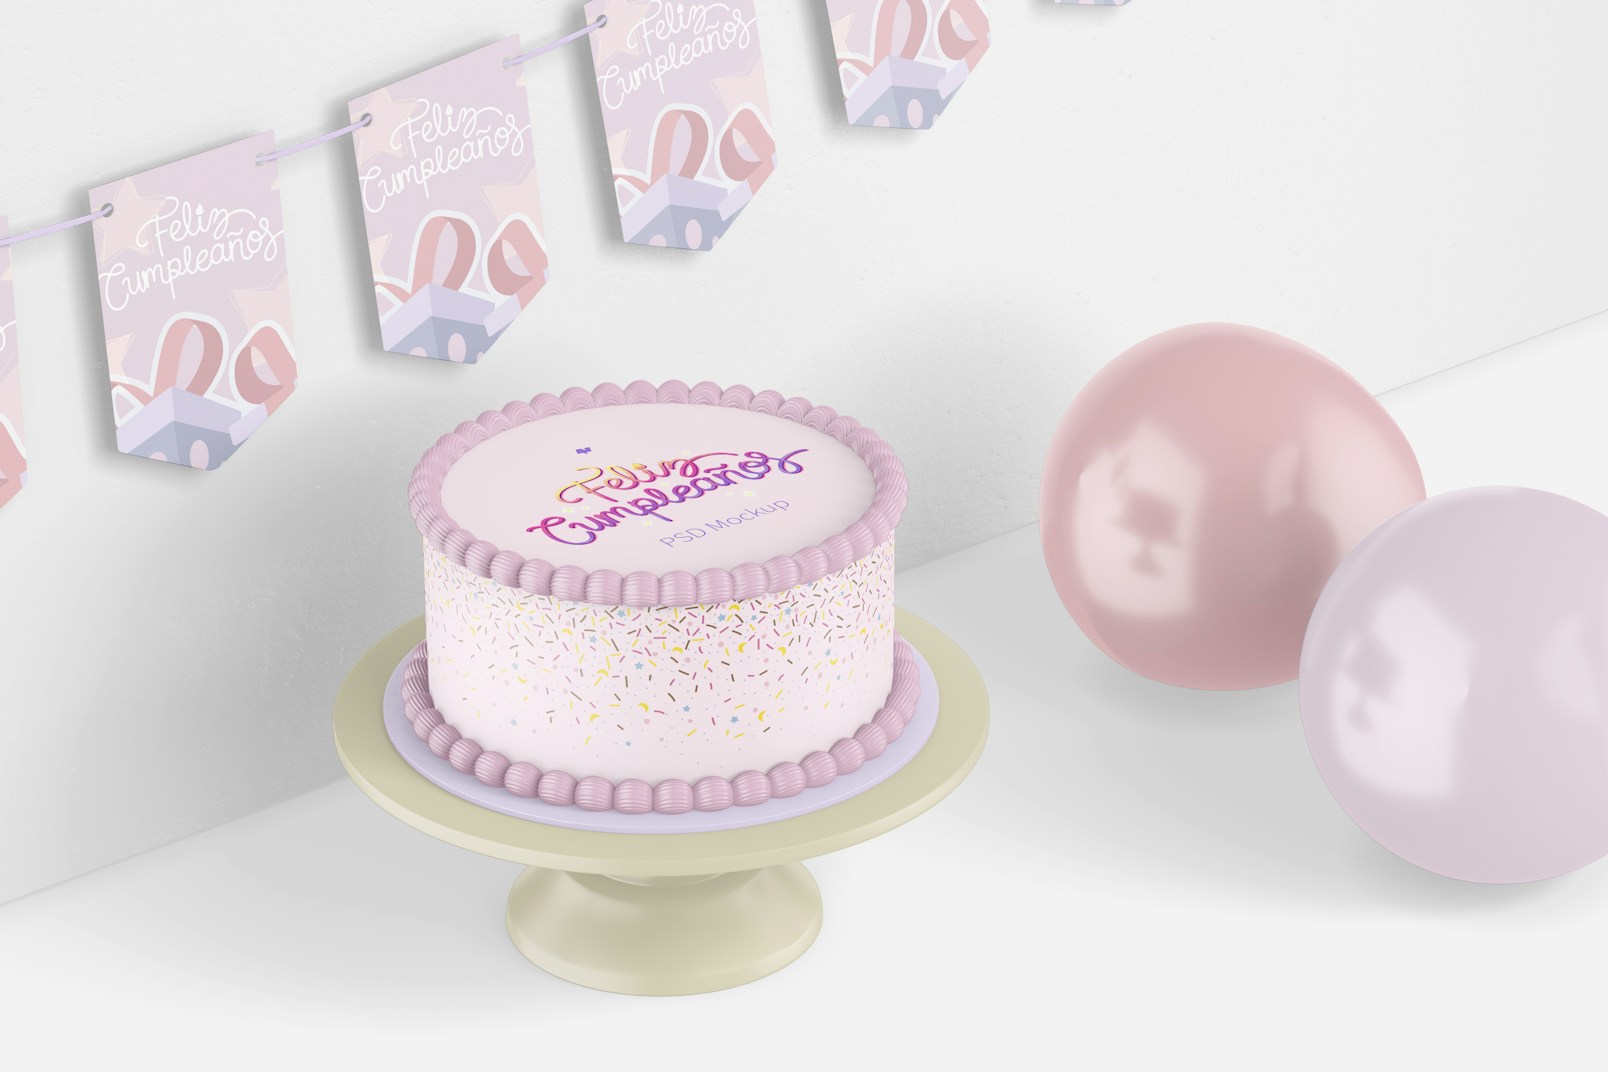 Round Cake with Banners Mockup